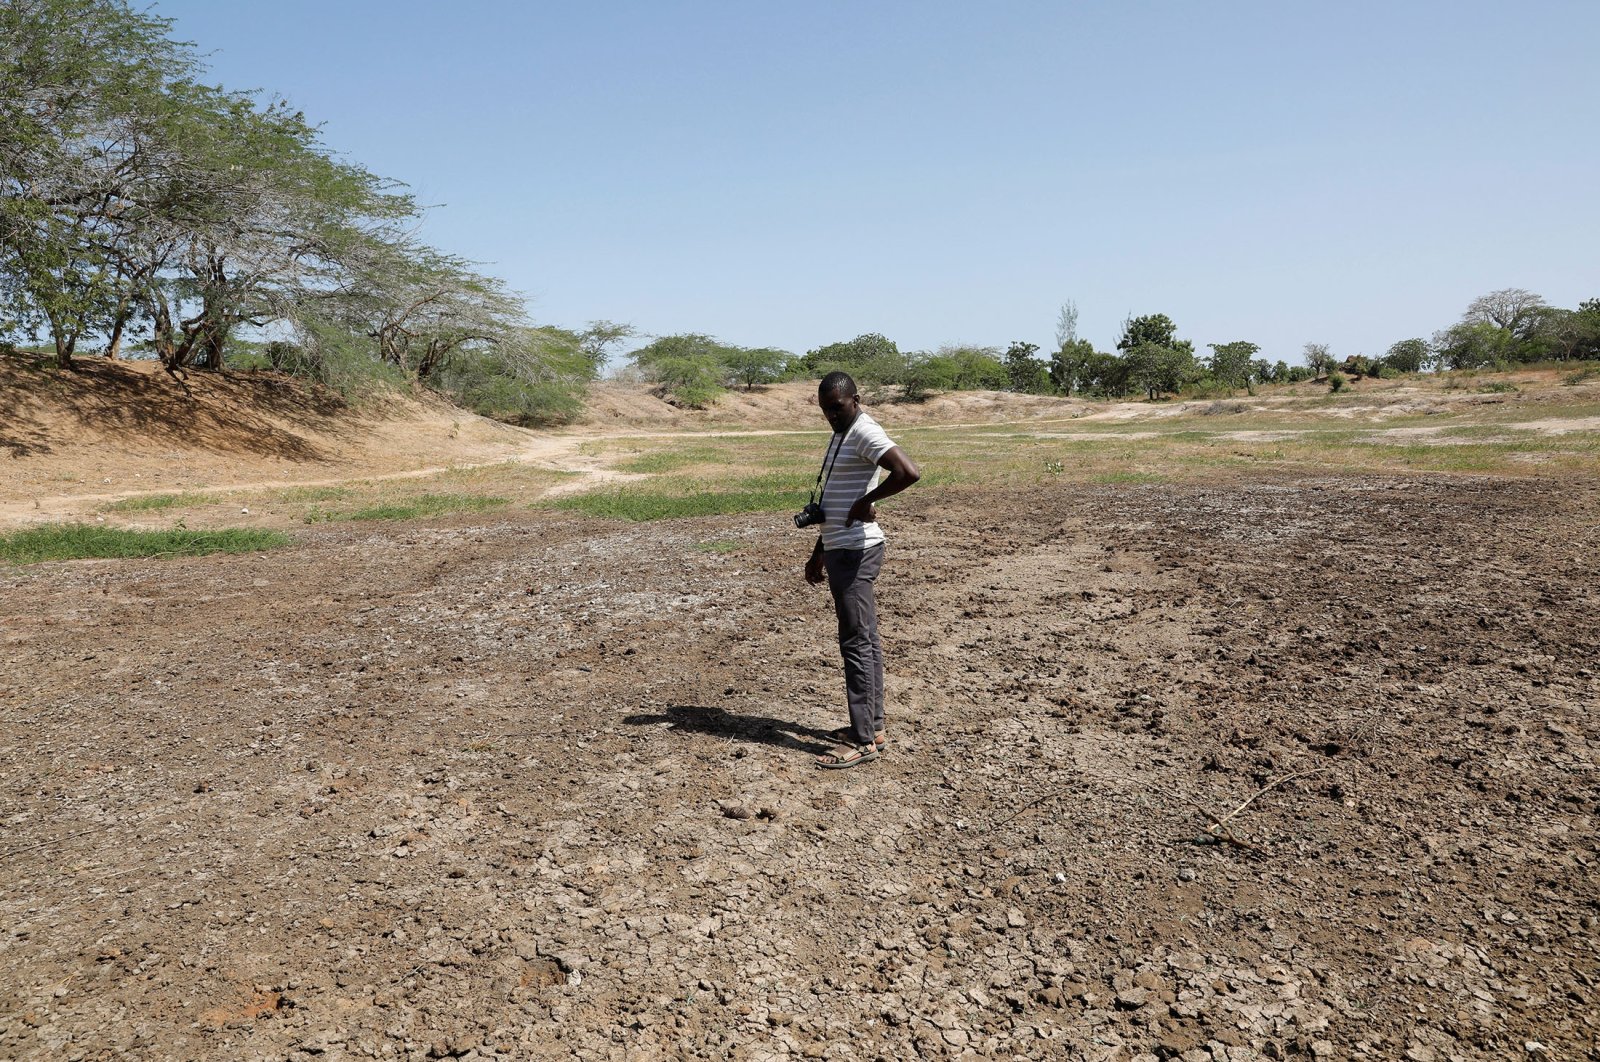 Famine Early Warning System Network in Africa (FEWS NET) scientist Chris Shitote examines a dry water hole in Kilifi county, Kenya, Feb. 16, 2022. (Reuters Photo)